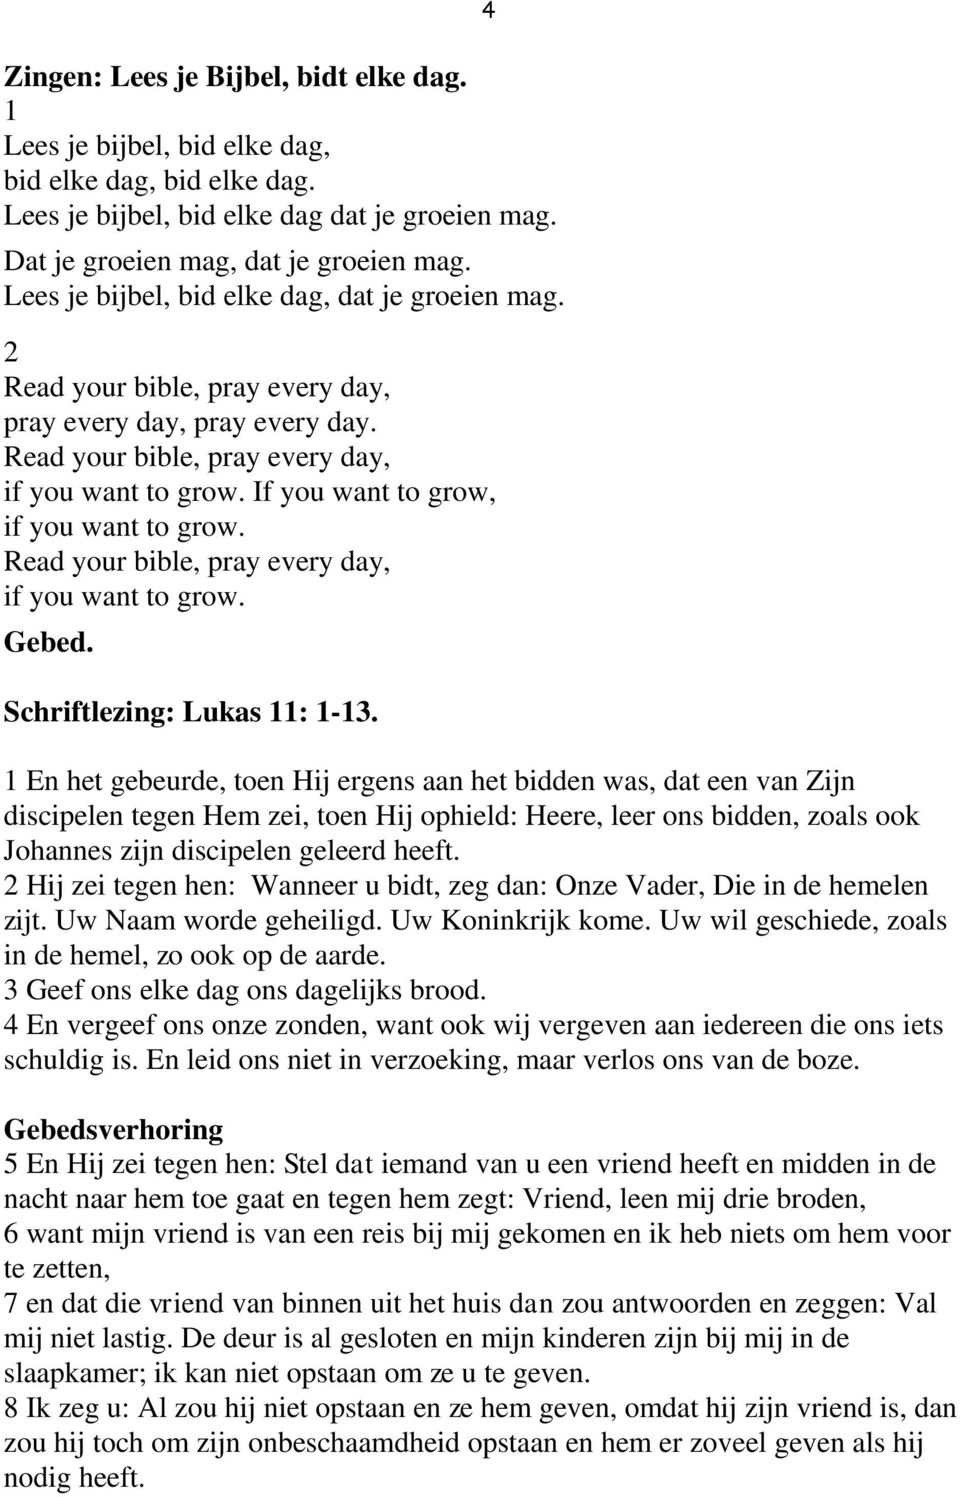 If you want to grow, if you want to grow. Read your bible, pray every day, if you want to grow. Gebed. Schriftlezing: Lukas 11: 1-13.